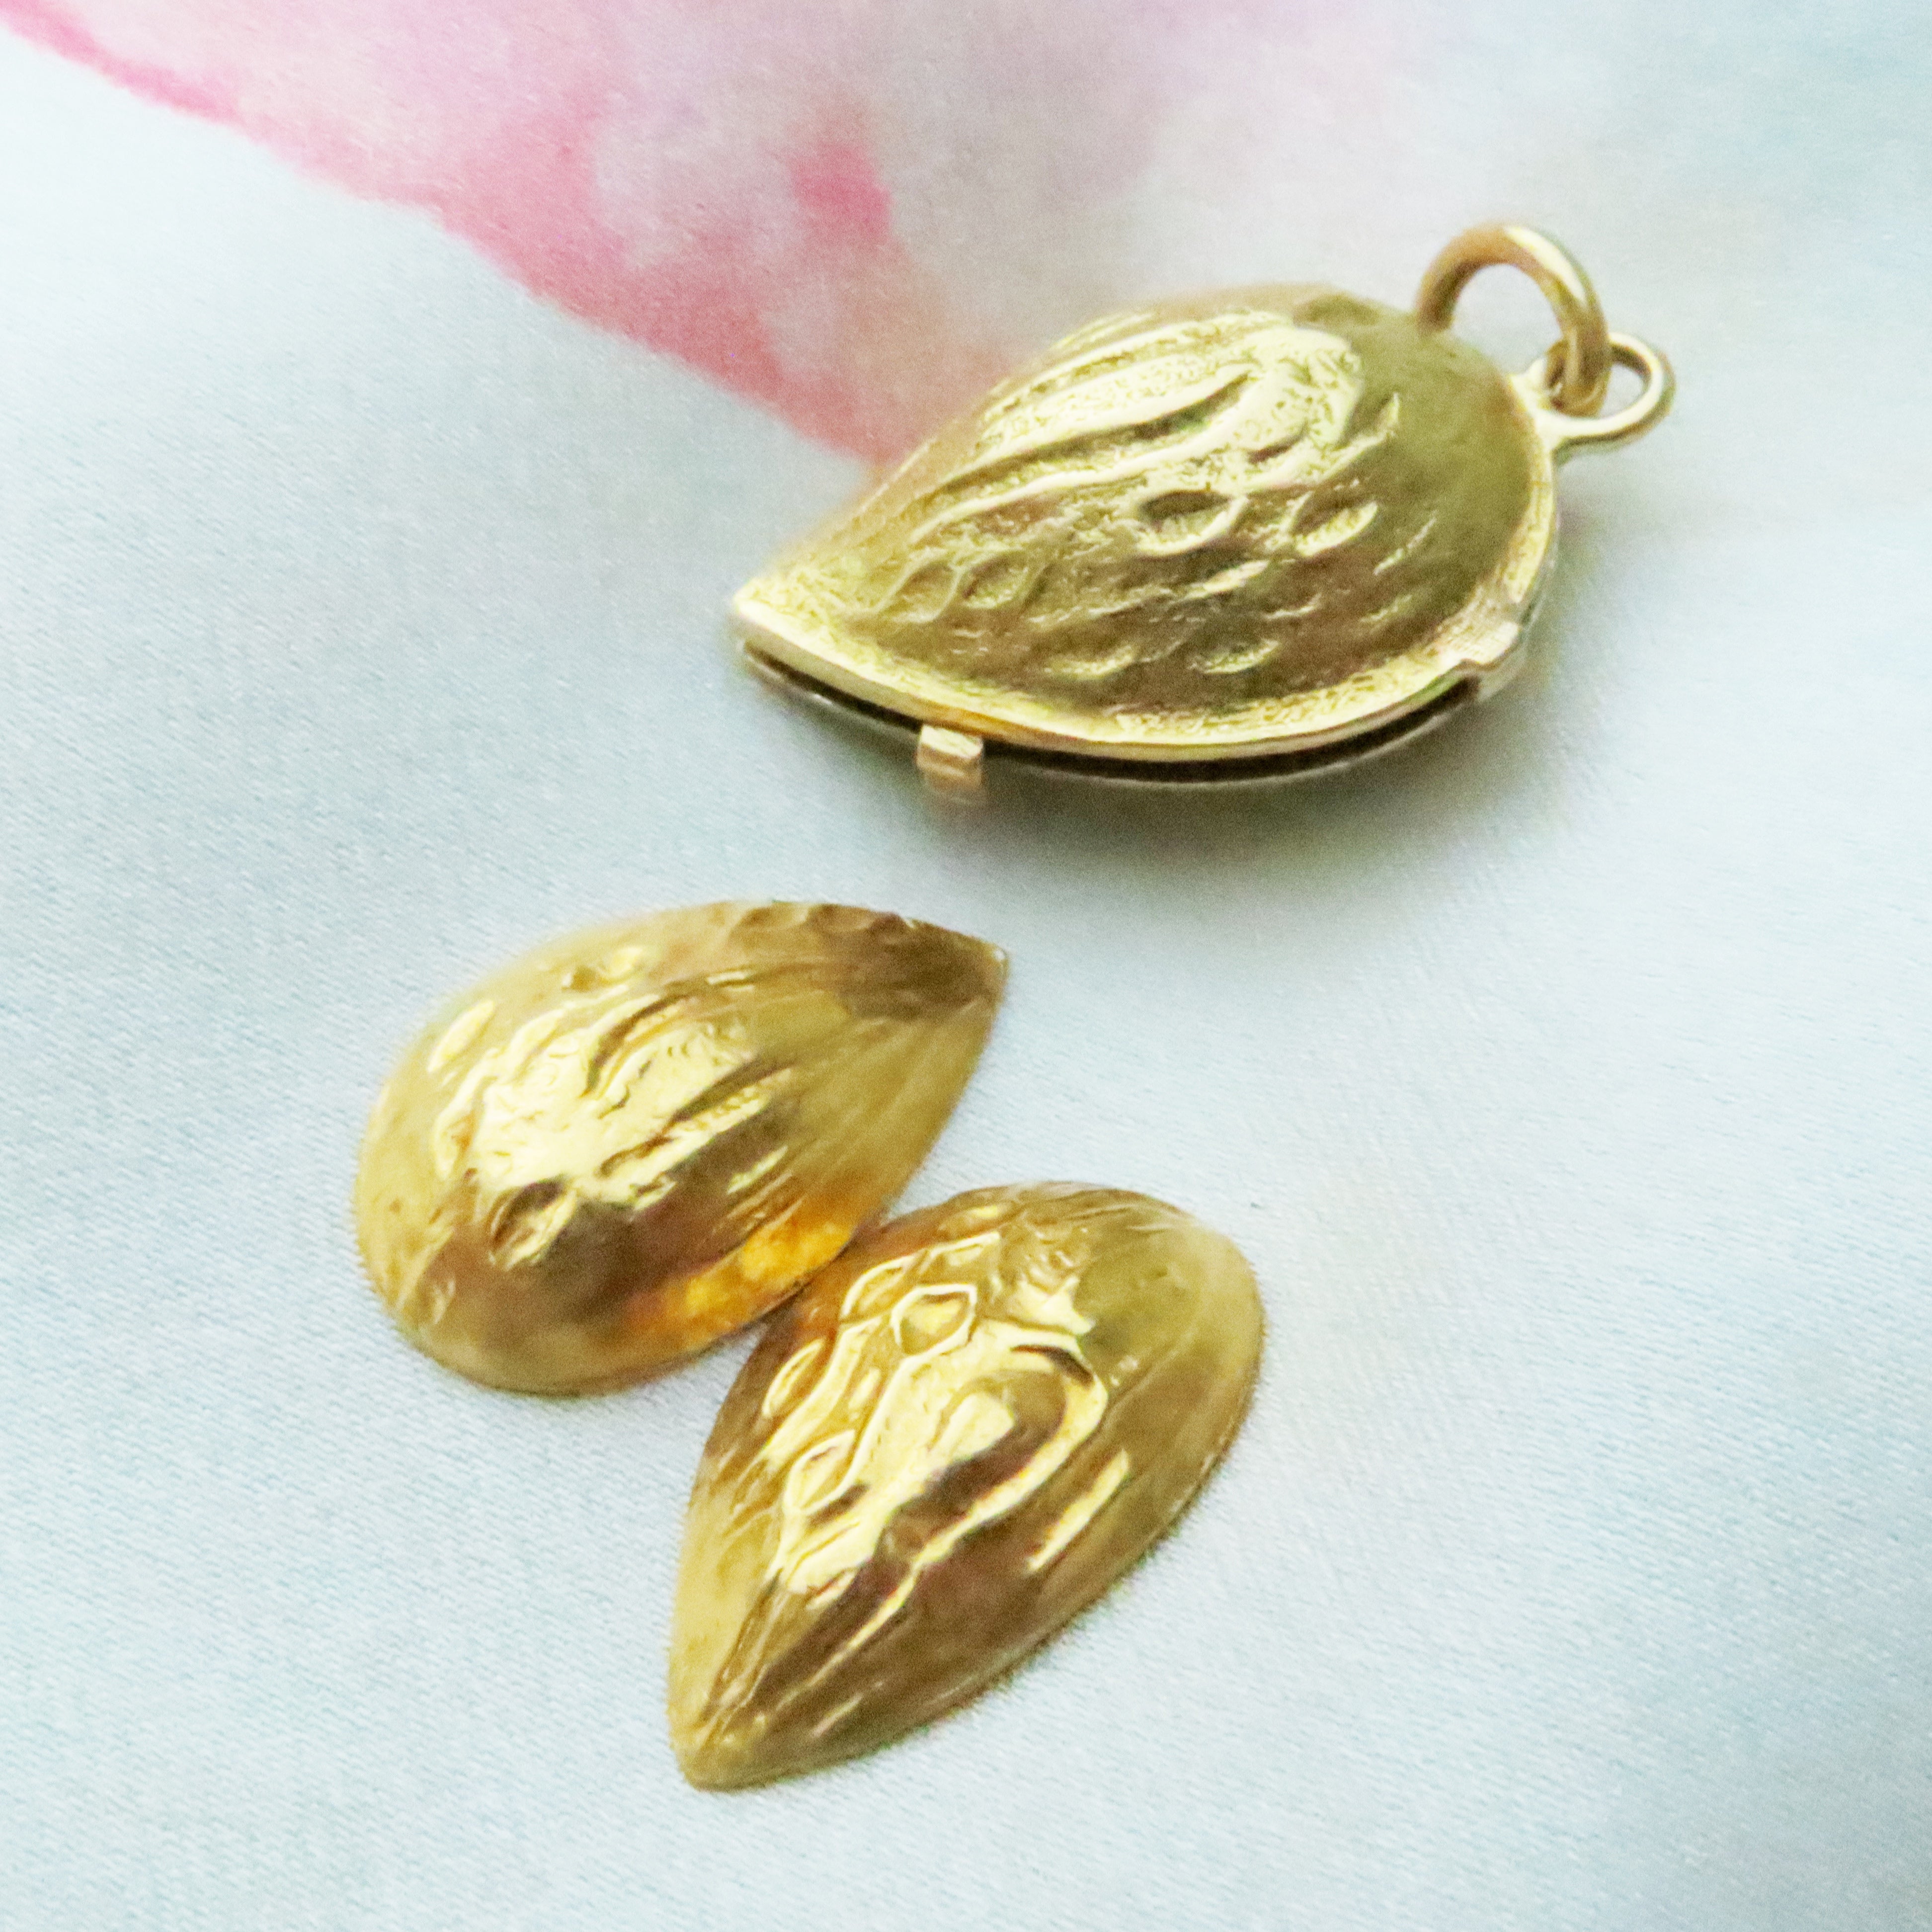 18ct almond pendant / charm with nuts inside